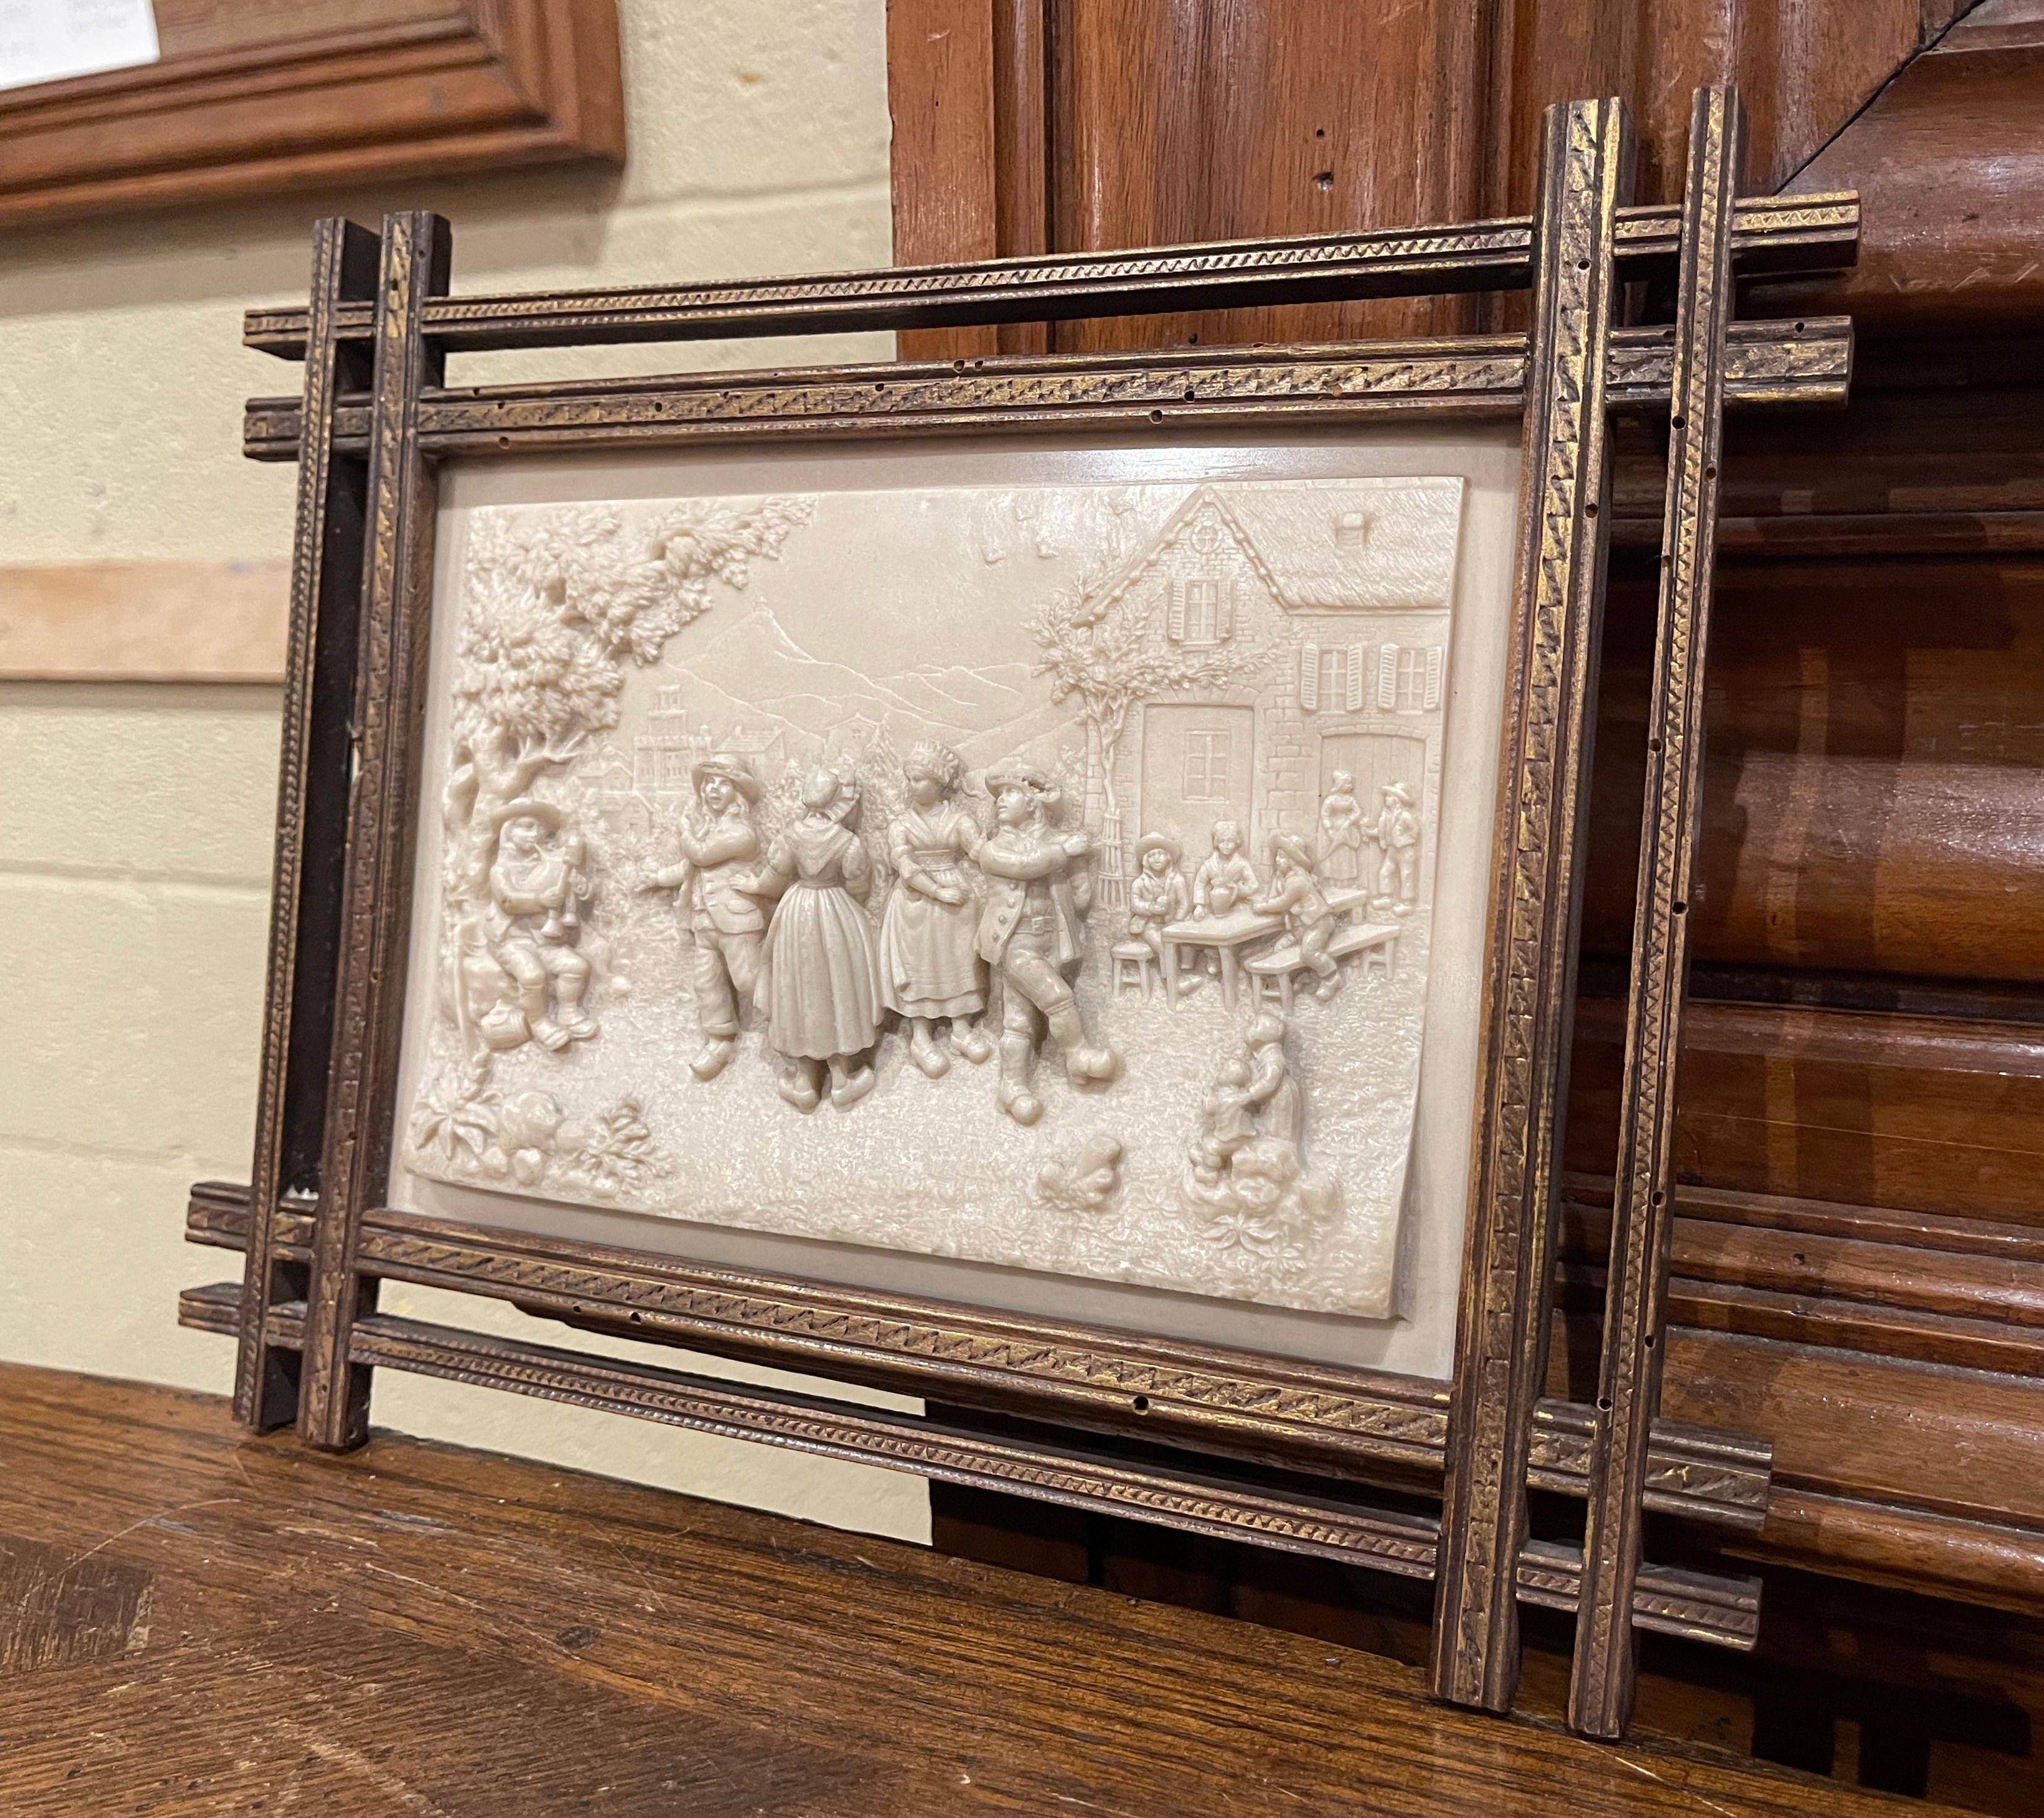 Decorate a dining room or a living room with this signed C.F. Baker antique sculpted alabaster plaque. Created in Belgium, circa 1890 and set in a carved frame with gilt accents, the artwork depicts a festive scene in the manner of David Teniers,